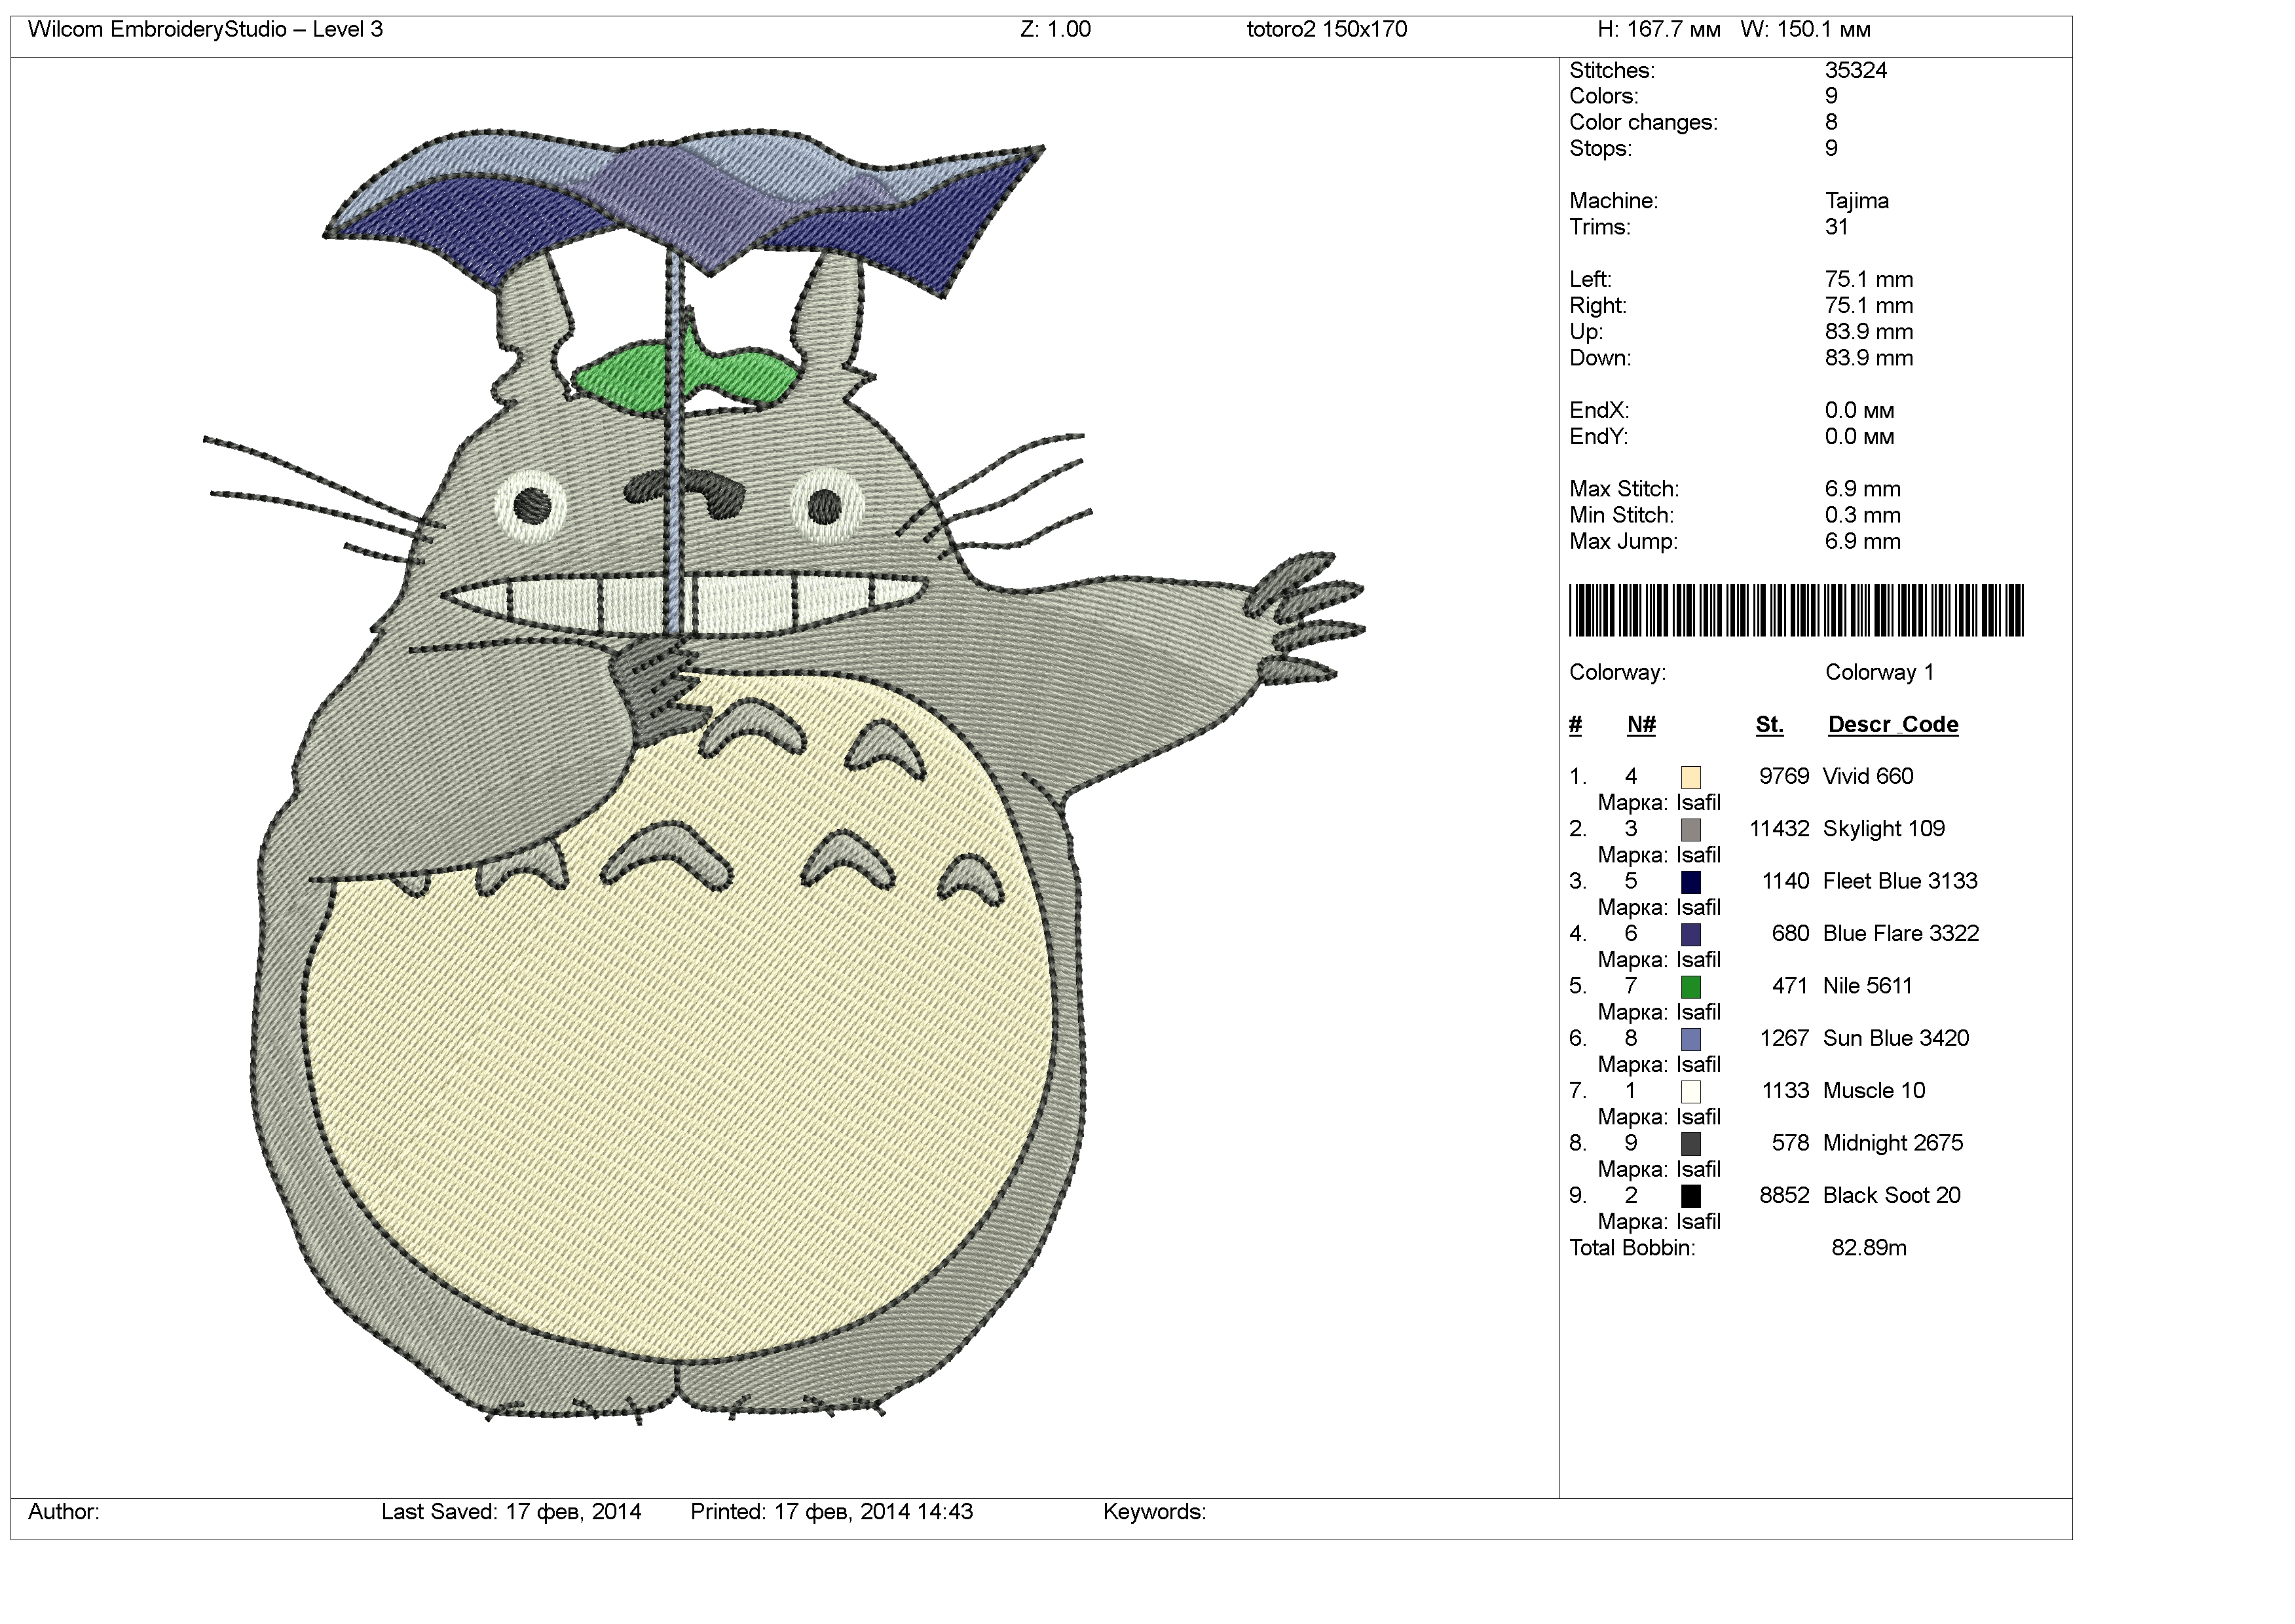 Totoro Embroidery Pattern Machine Embroidery Designs Totoro Japanese Animation